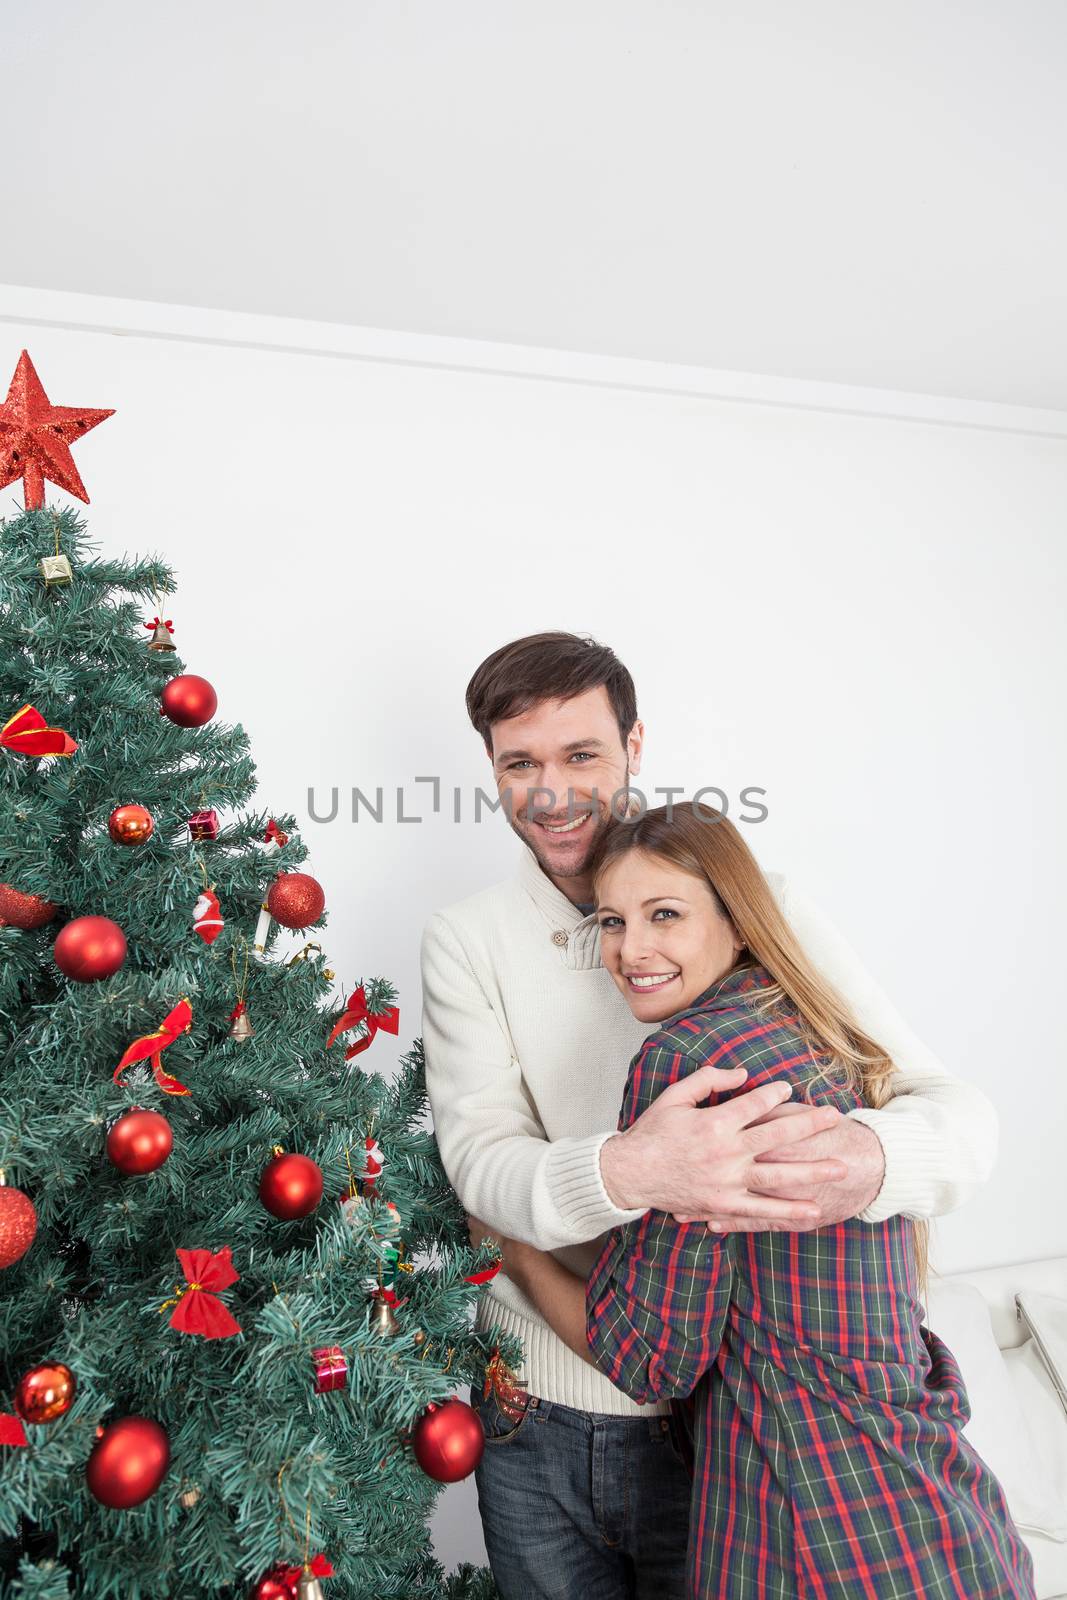 30-35, adult, background, ball, caucasian, celebrate, celebration, christmas, couple, cute, day, december, decorate, decorating, decoration, decorations, emotion, family, female, fun, gift, girl, green, happiness, happy, holiday, home, house, hug, husband, love, lovers, male, man, marriage, men, model, new, old, person, present, property, red, relationship, releases, ribbon, romantic, santa, smile, star, together, tree, vertical, white, wife, winter, woman, women, xmas, year, years, young